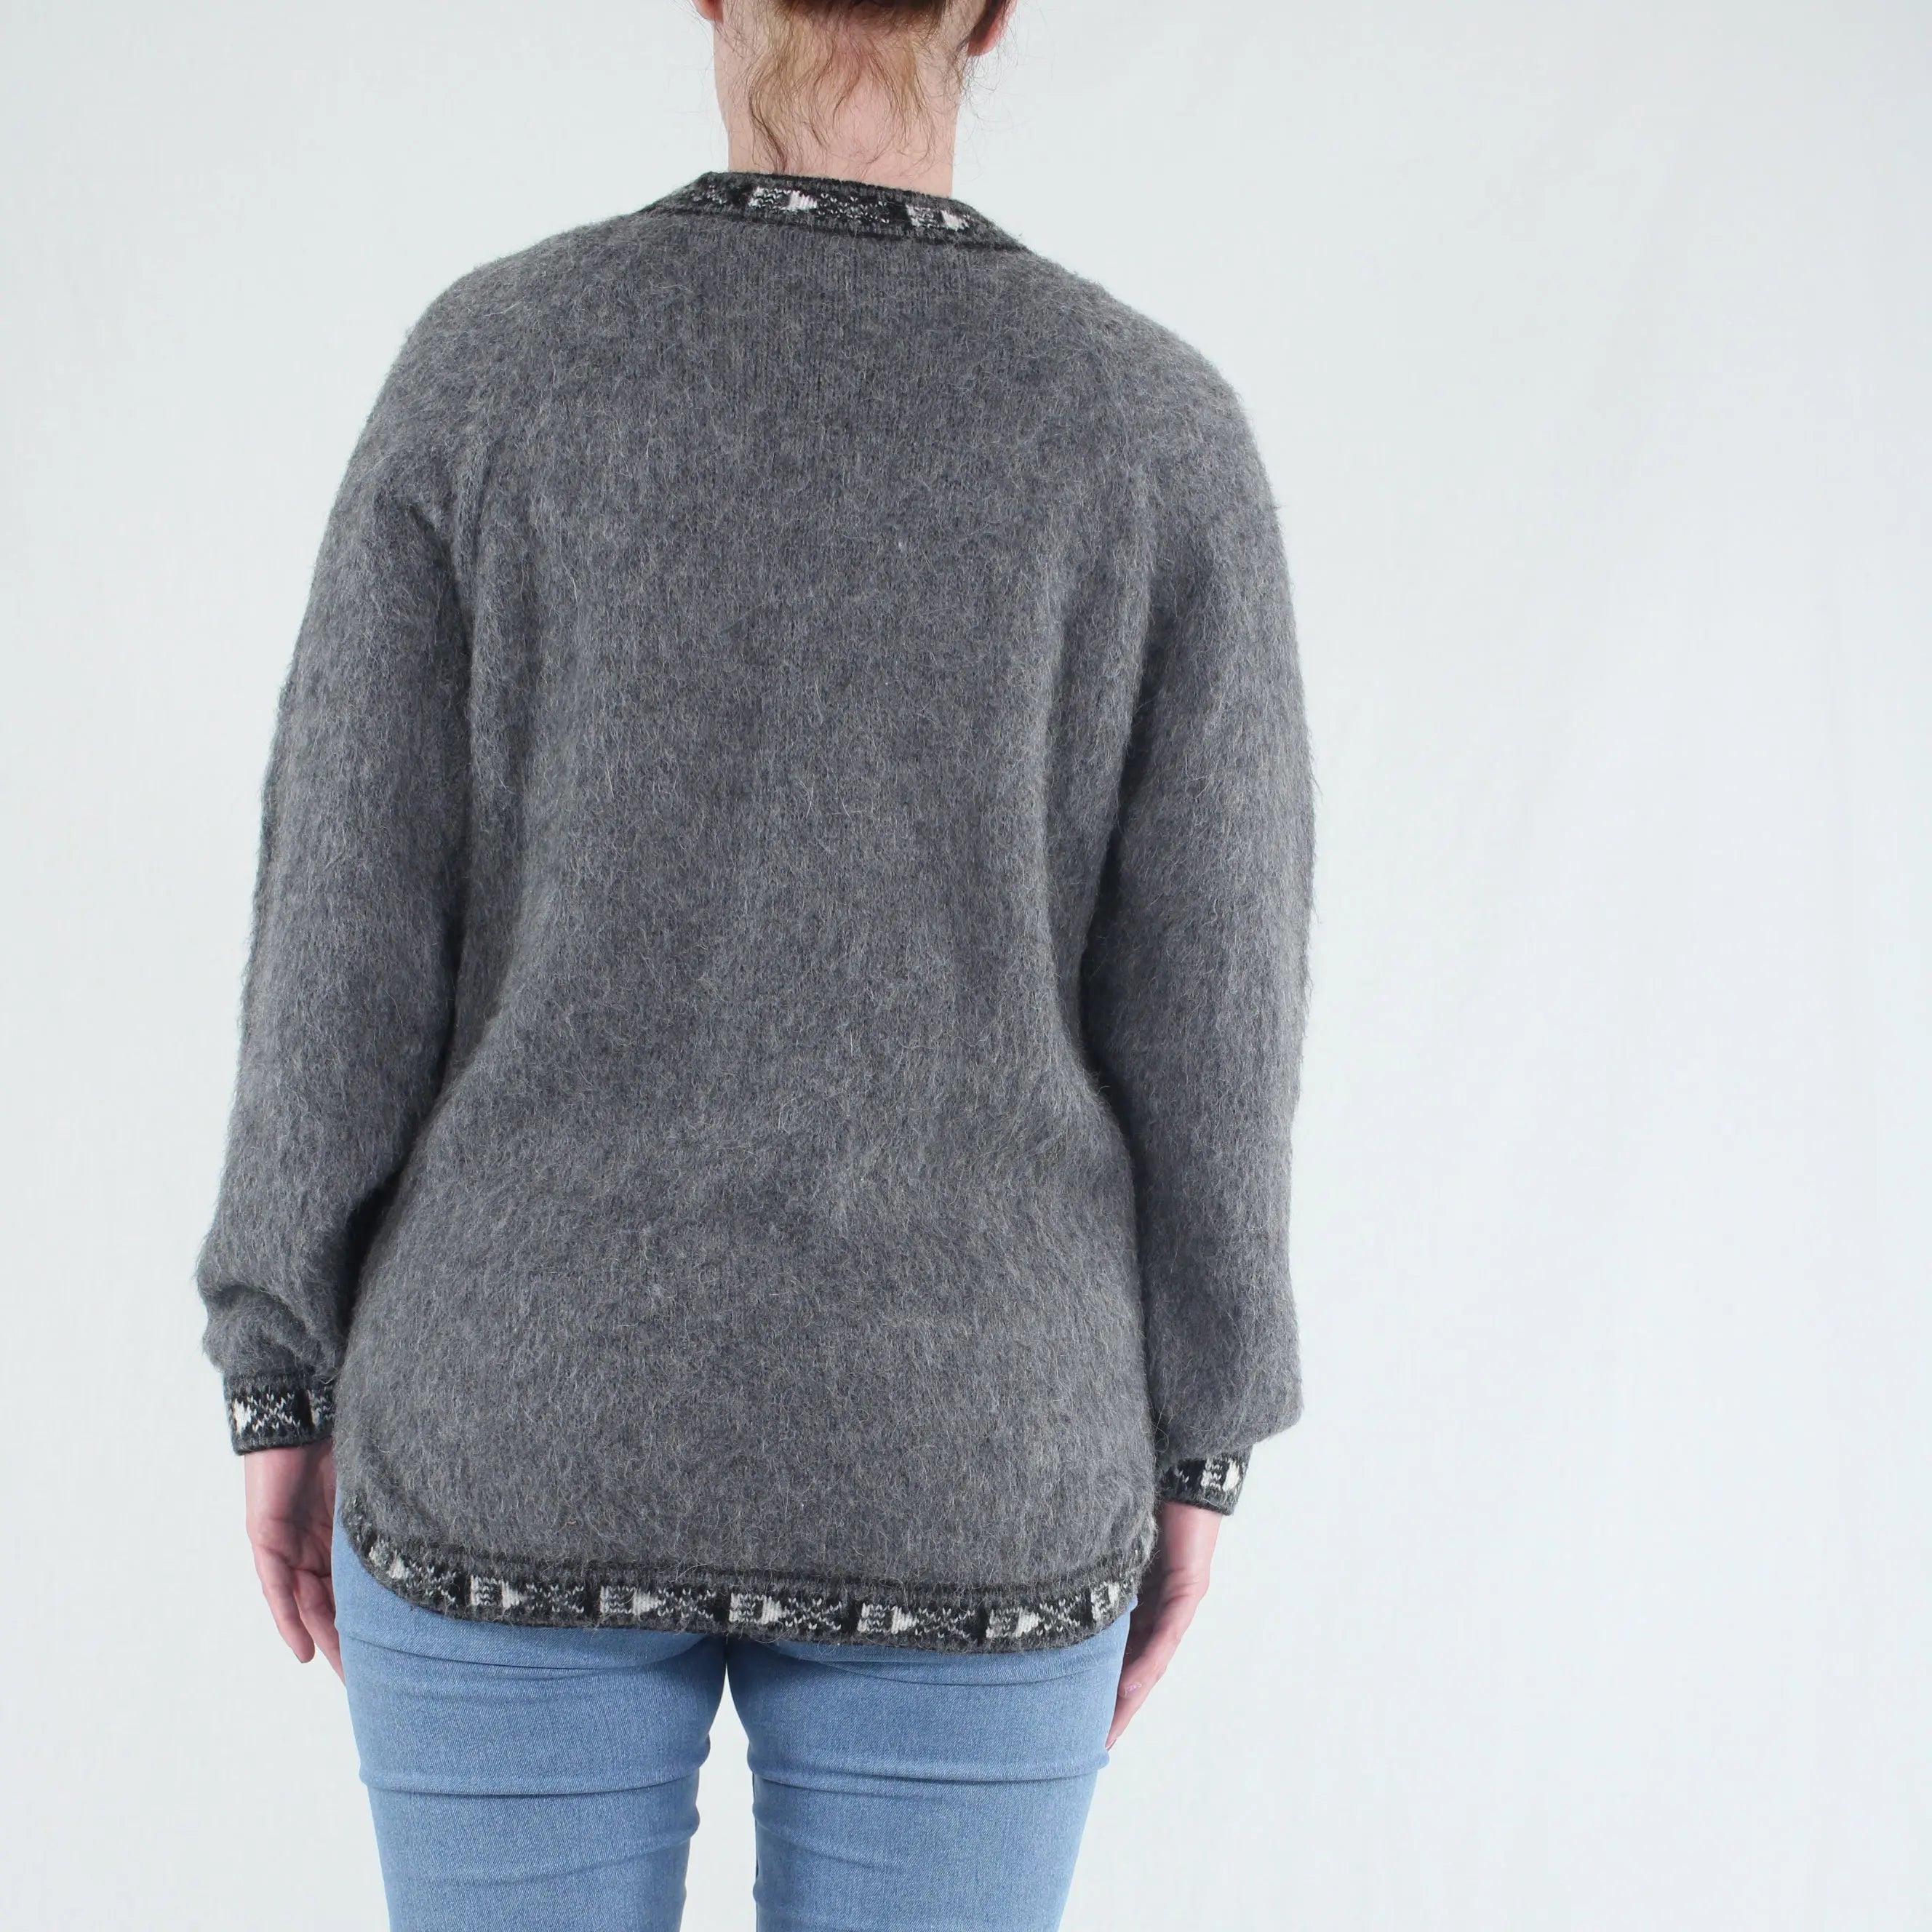 Unknown - Very Soft Grey Jumper- ThriftTale.com - Vintage and second handclothing